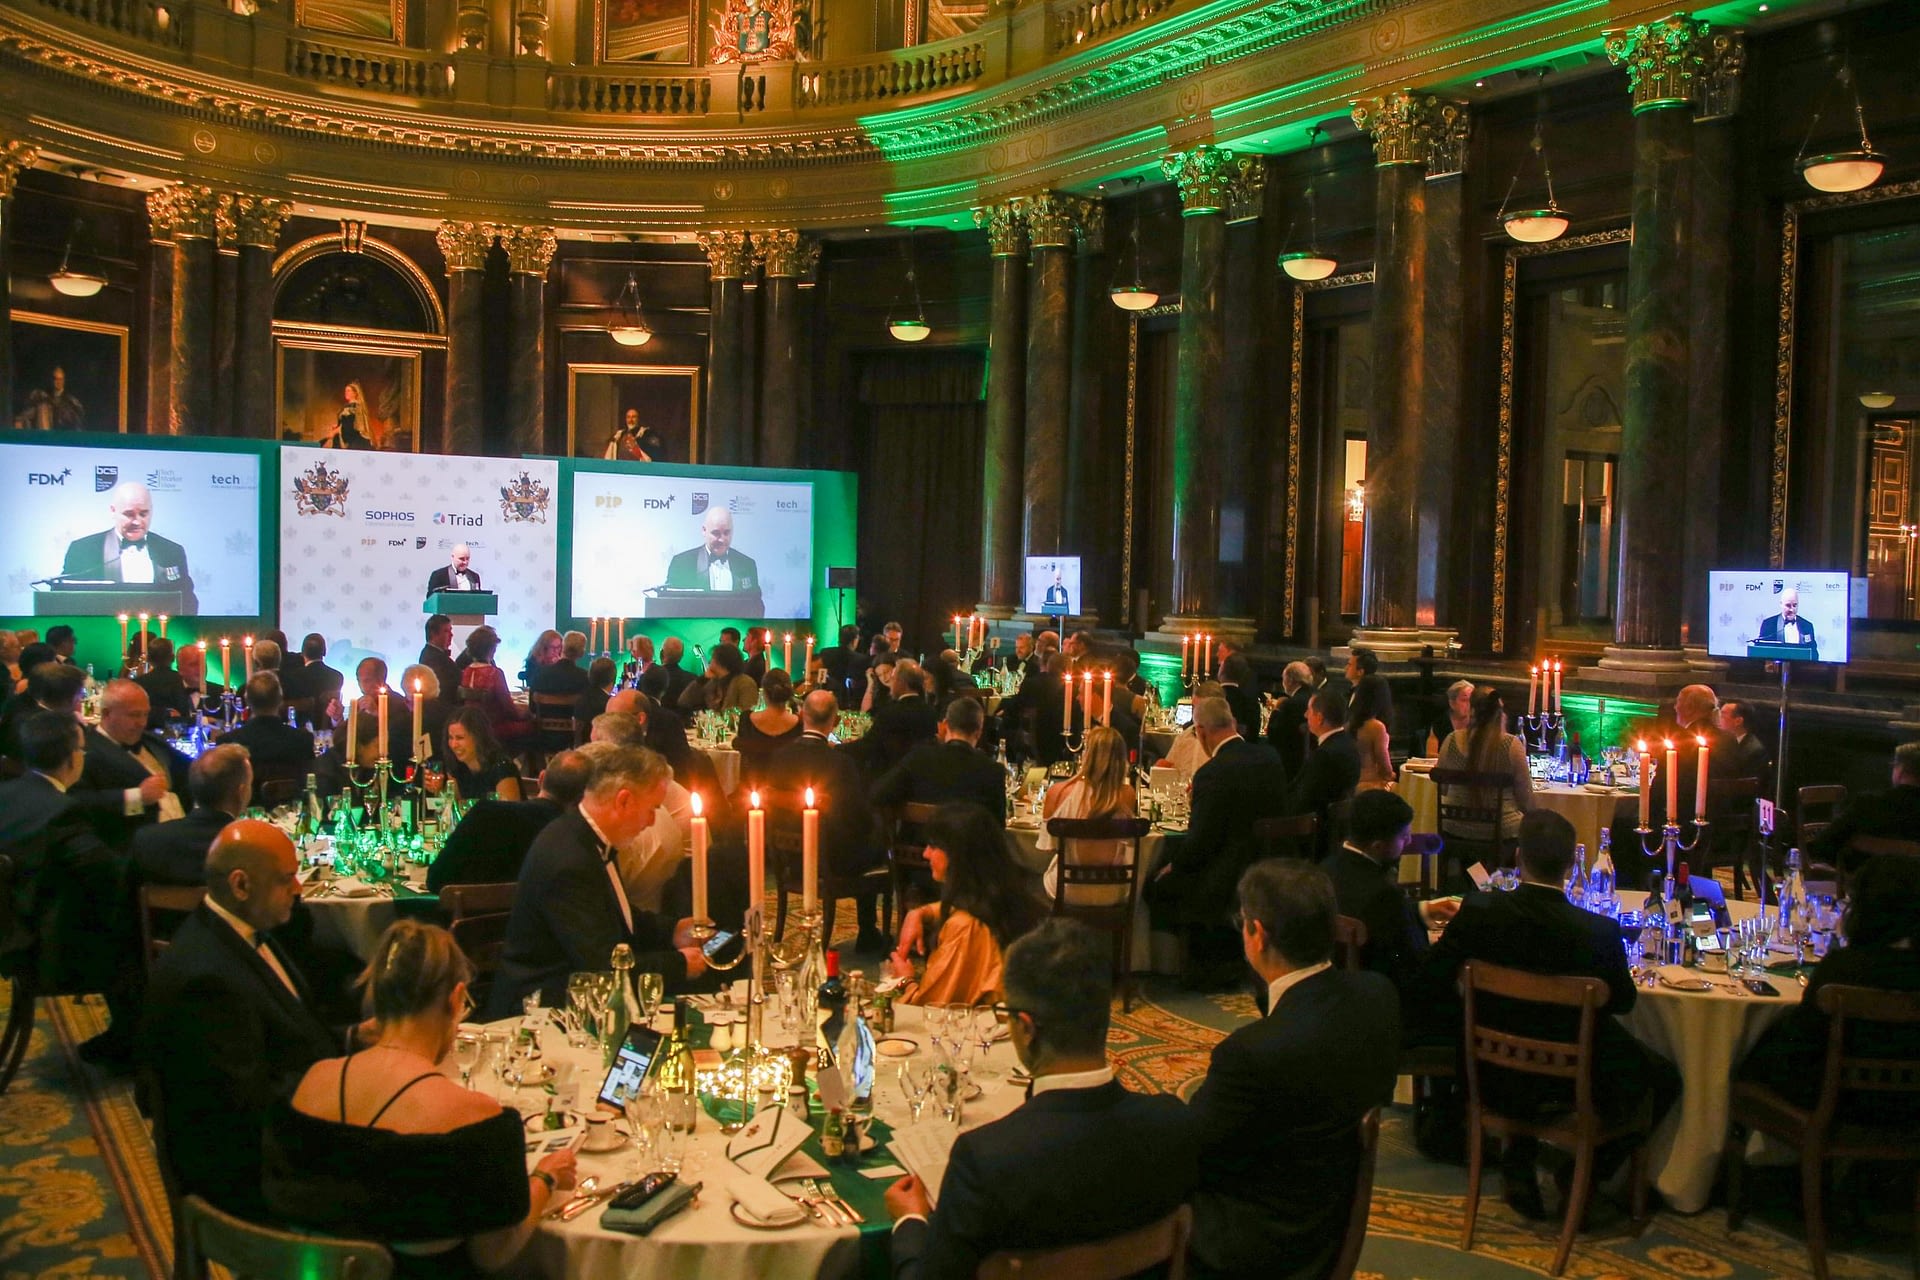 The IT industry dinner at Drapers' Hall